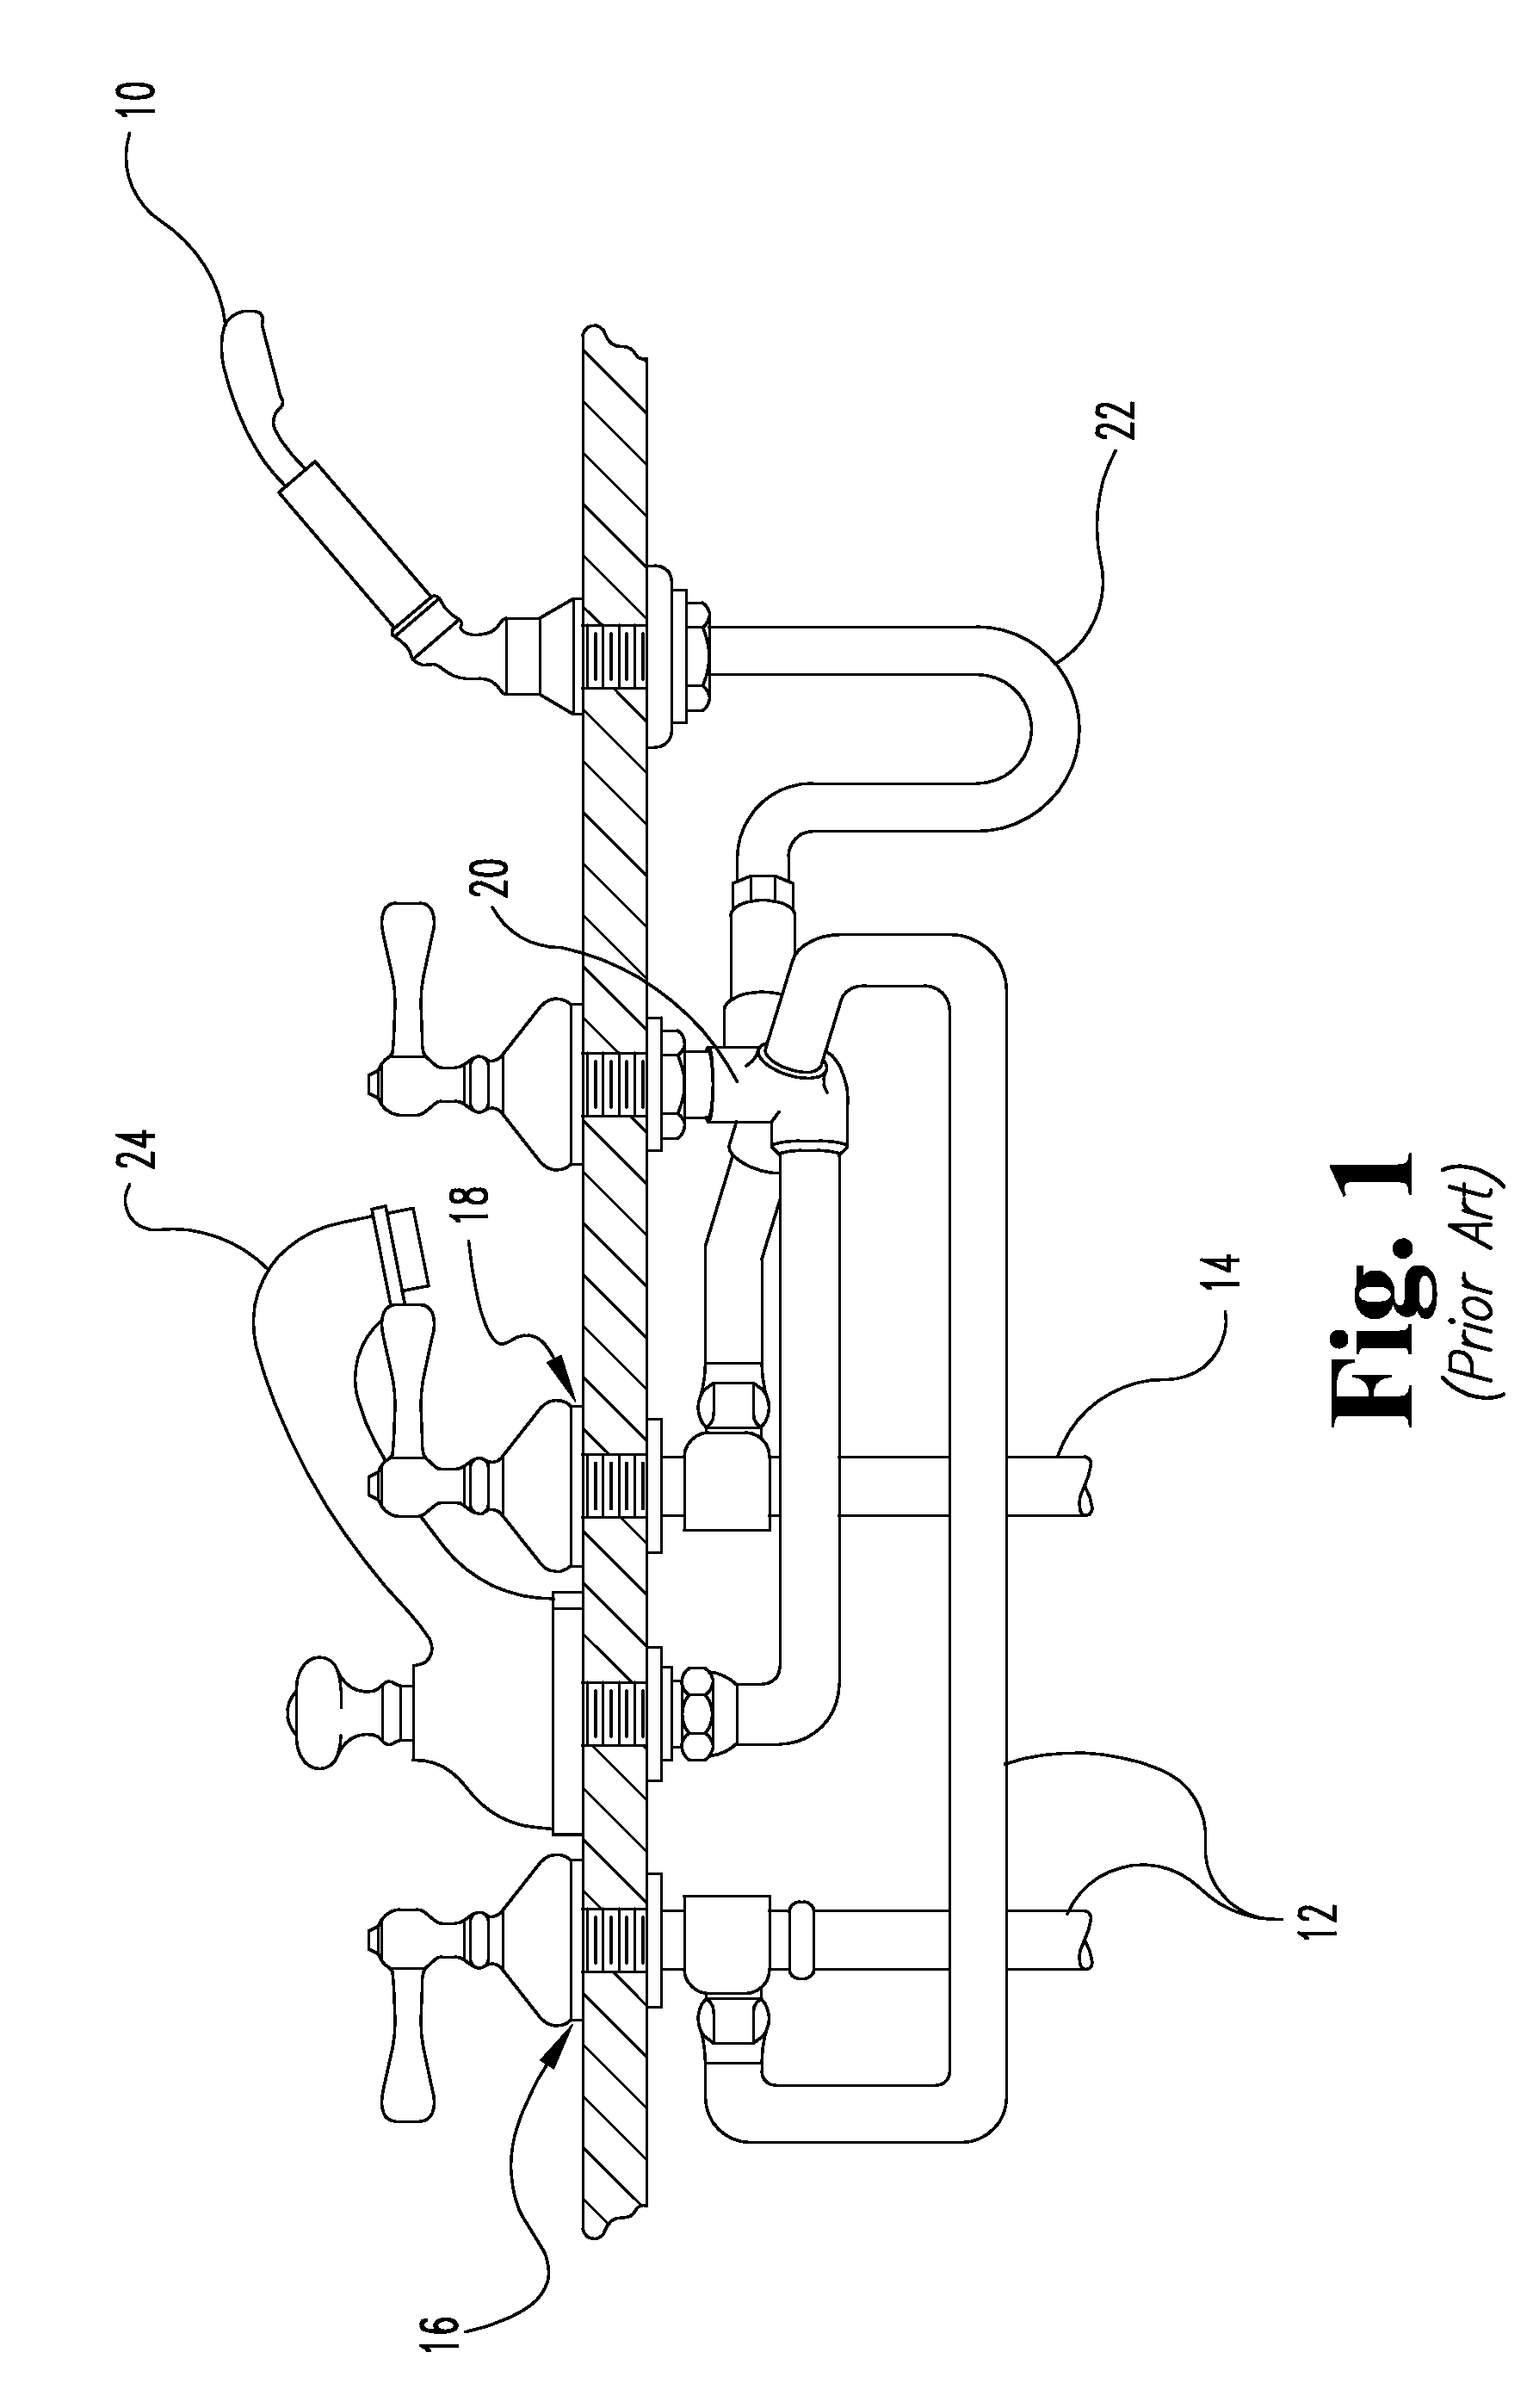 Pressure and temperature balancing valve system for a roman rub